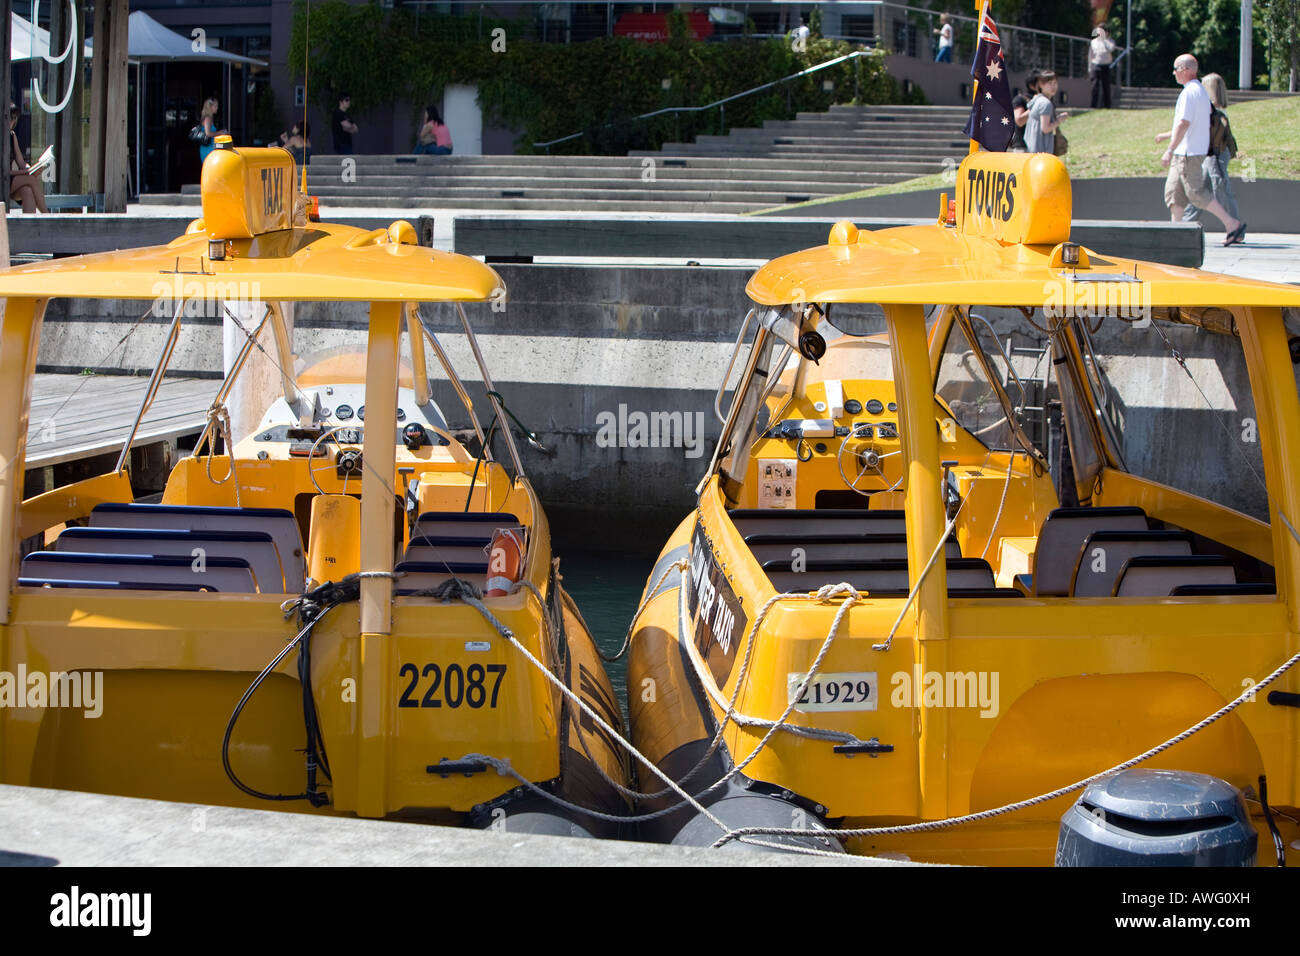 yellow taxi boats moored in darling harbour, sydney,australia Stock Photo